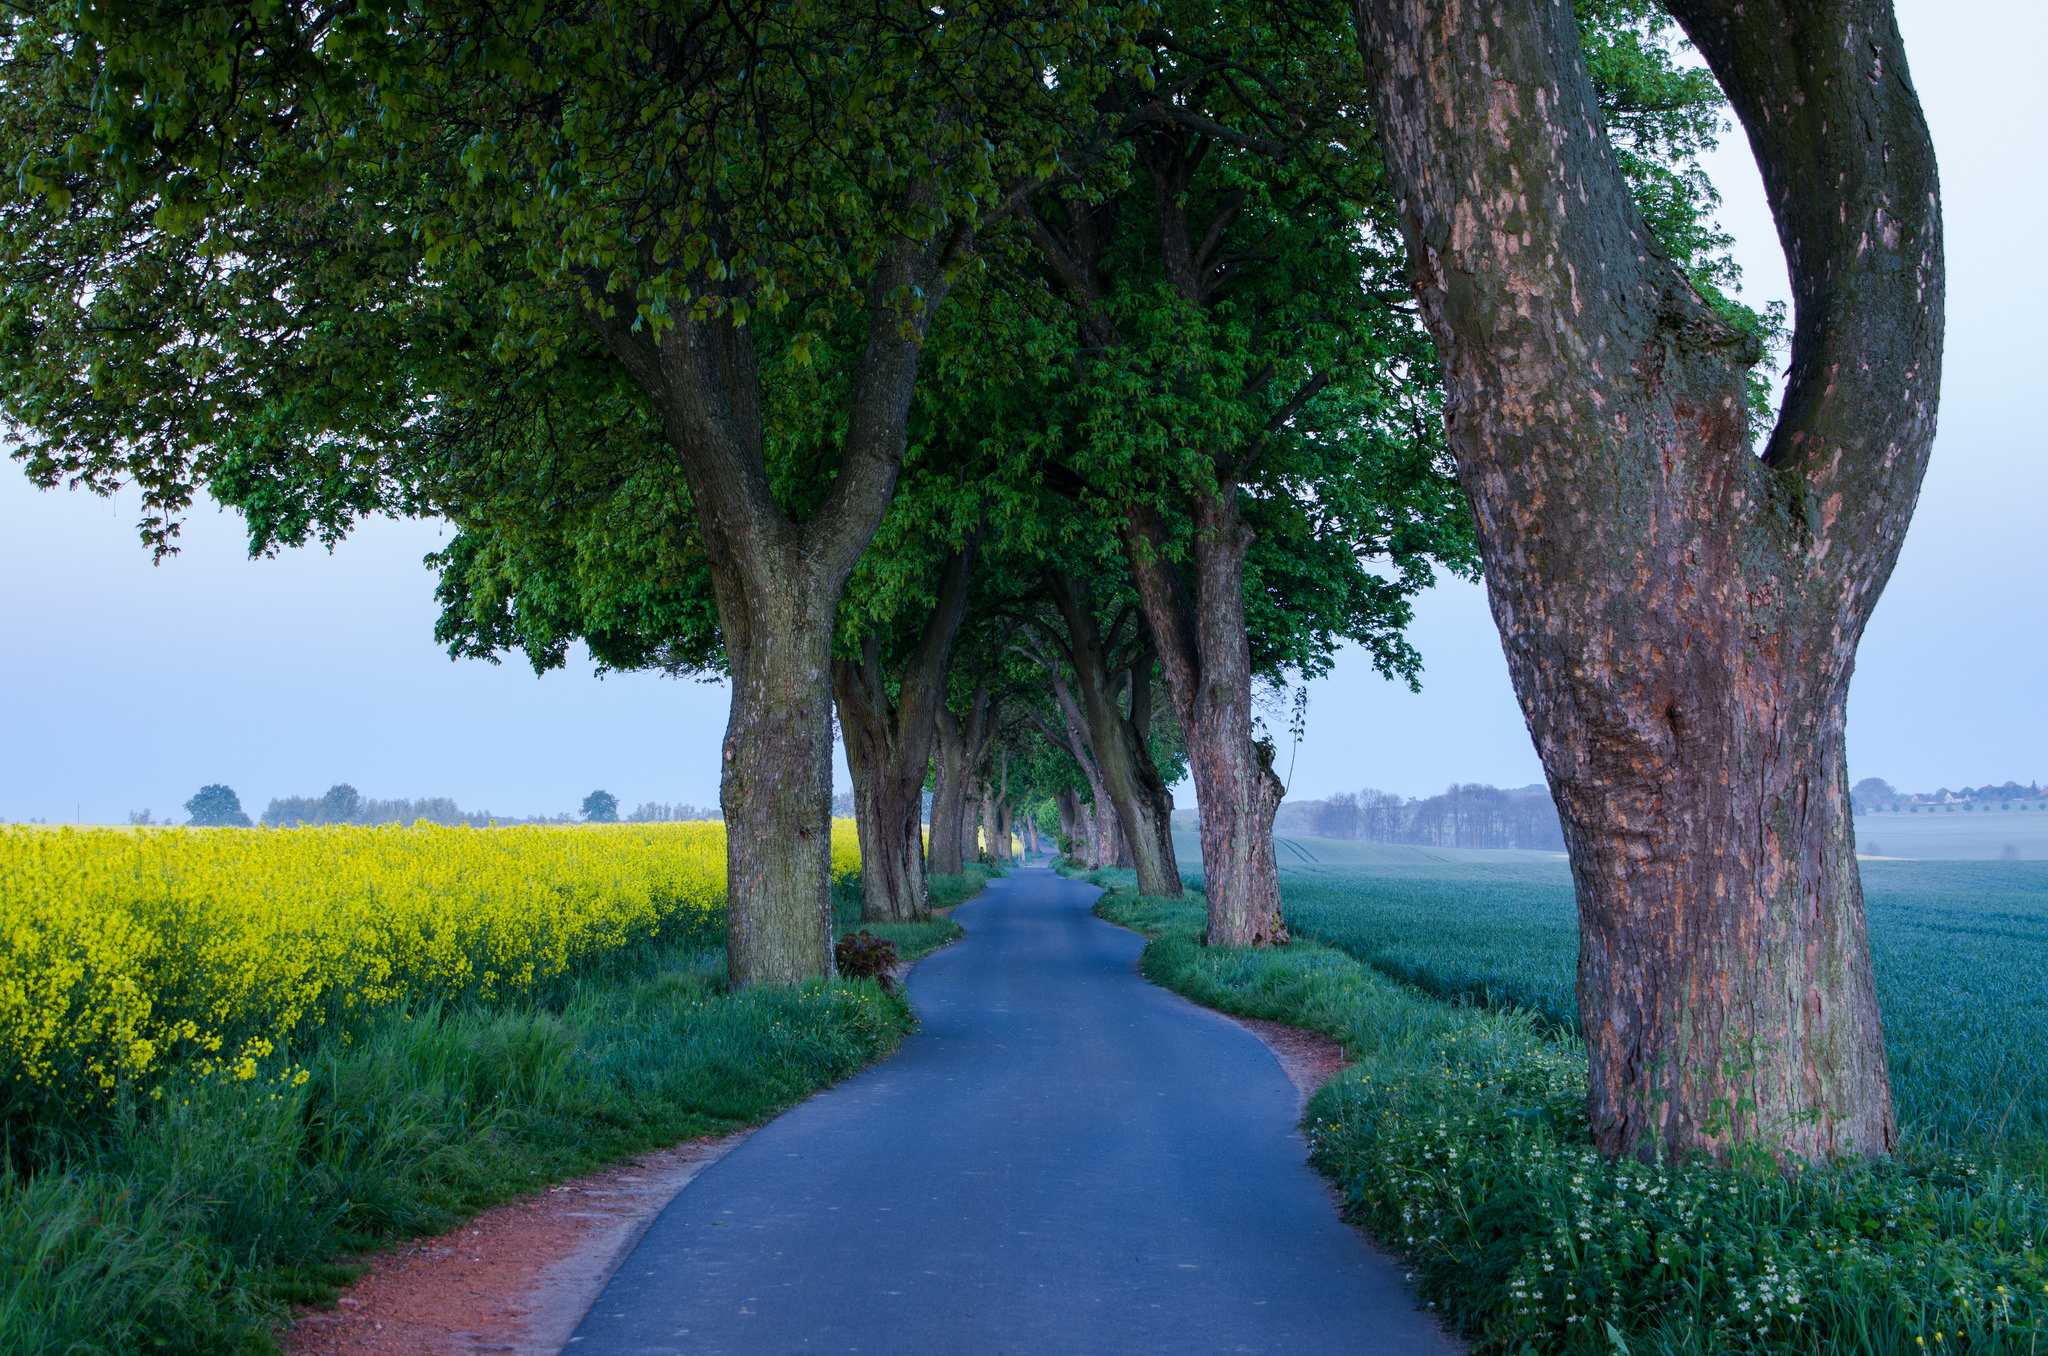 man made, road, field, rapeseed, tree, tree lined, yellow flower